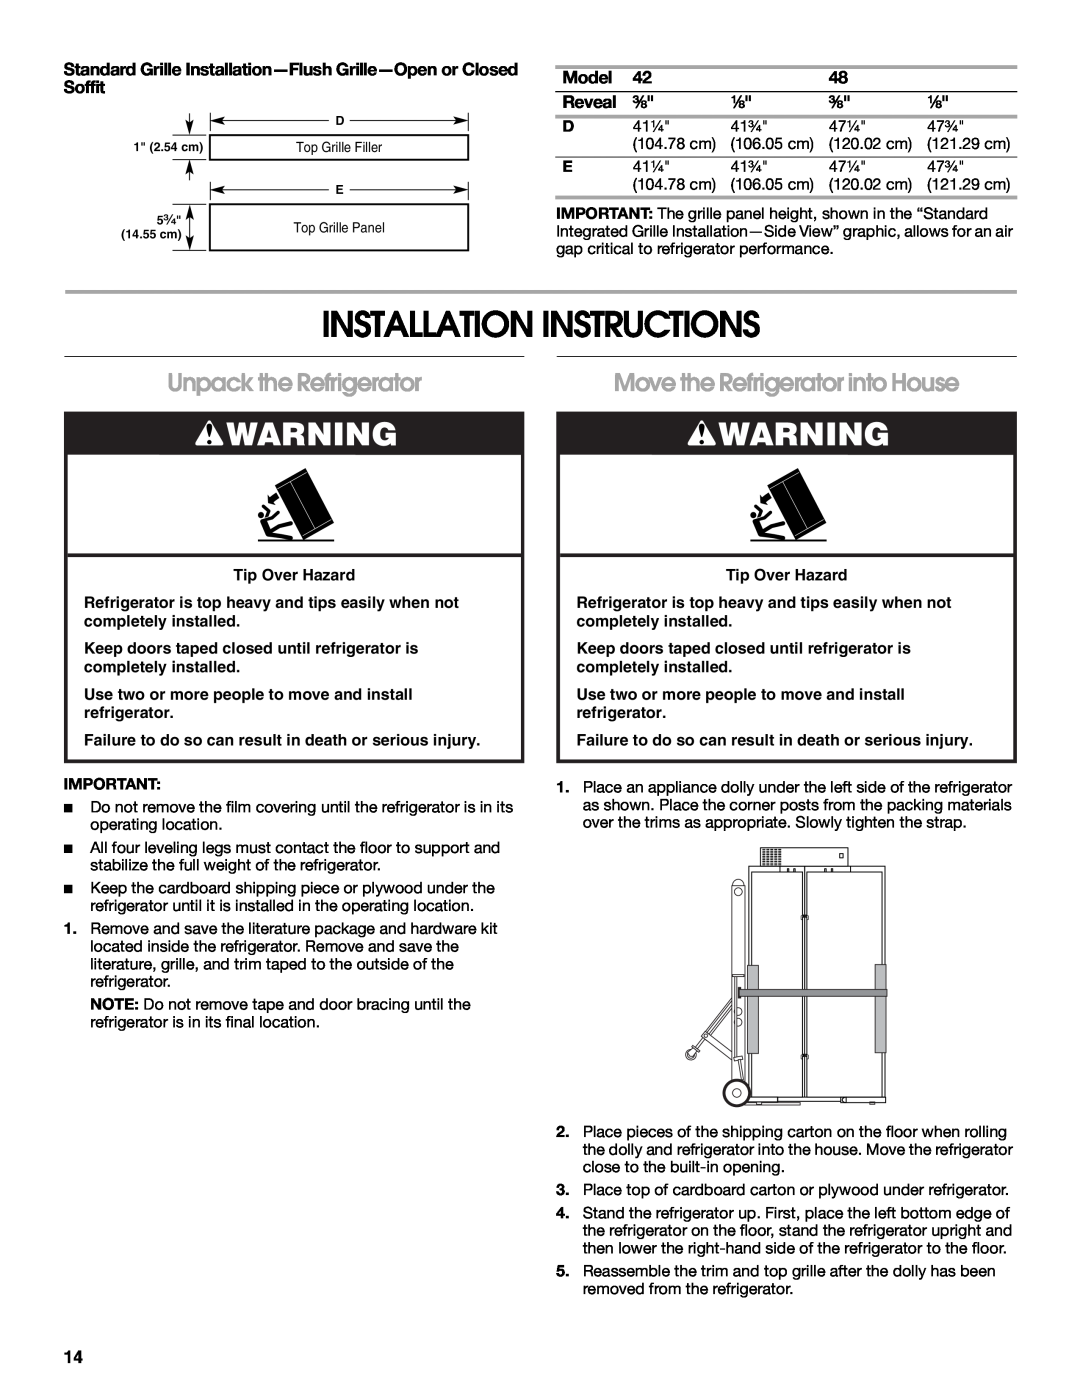 Jenn-Air W10379136B Installation Instructions, Unpack the Refrigerator, Move the Refrigerator into House, Model, Reveal 